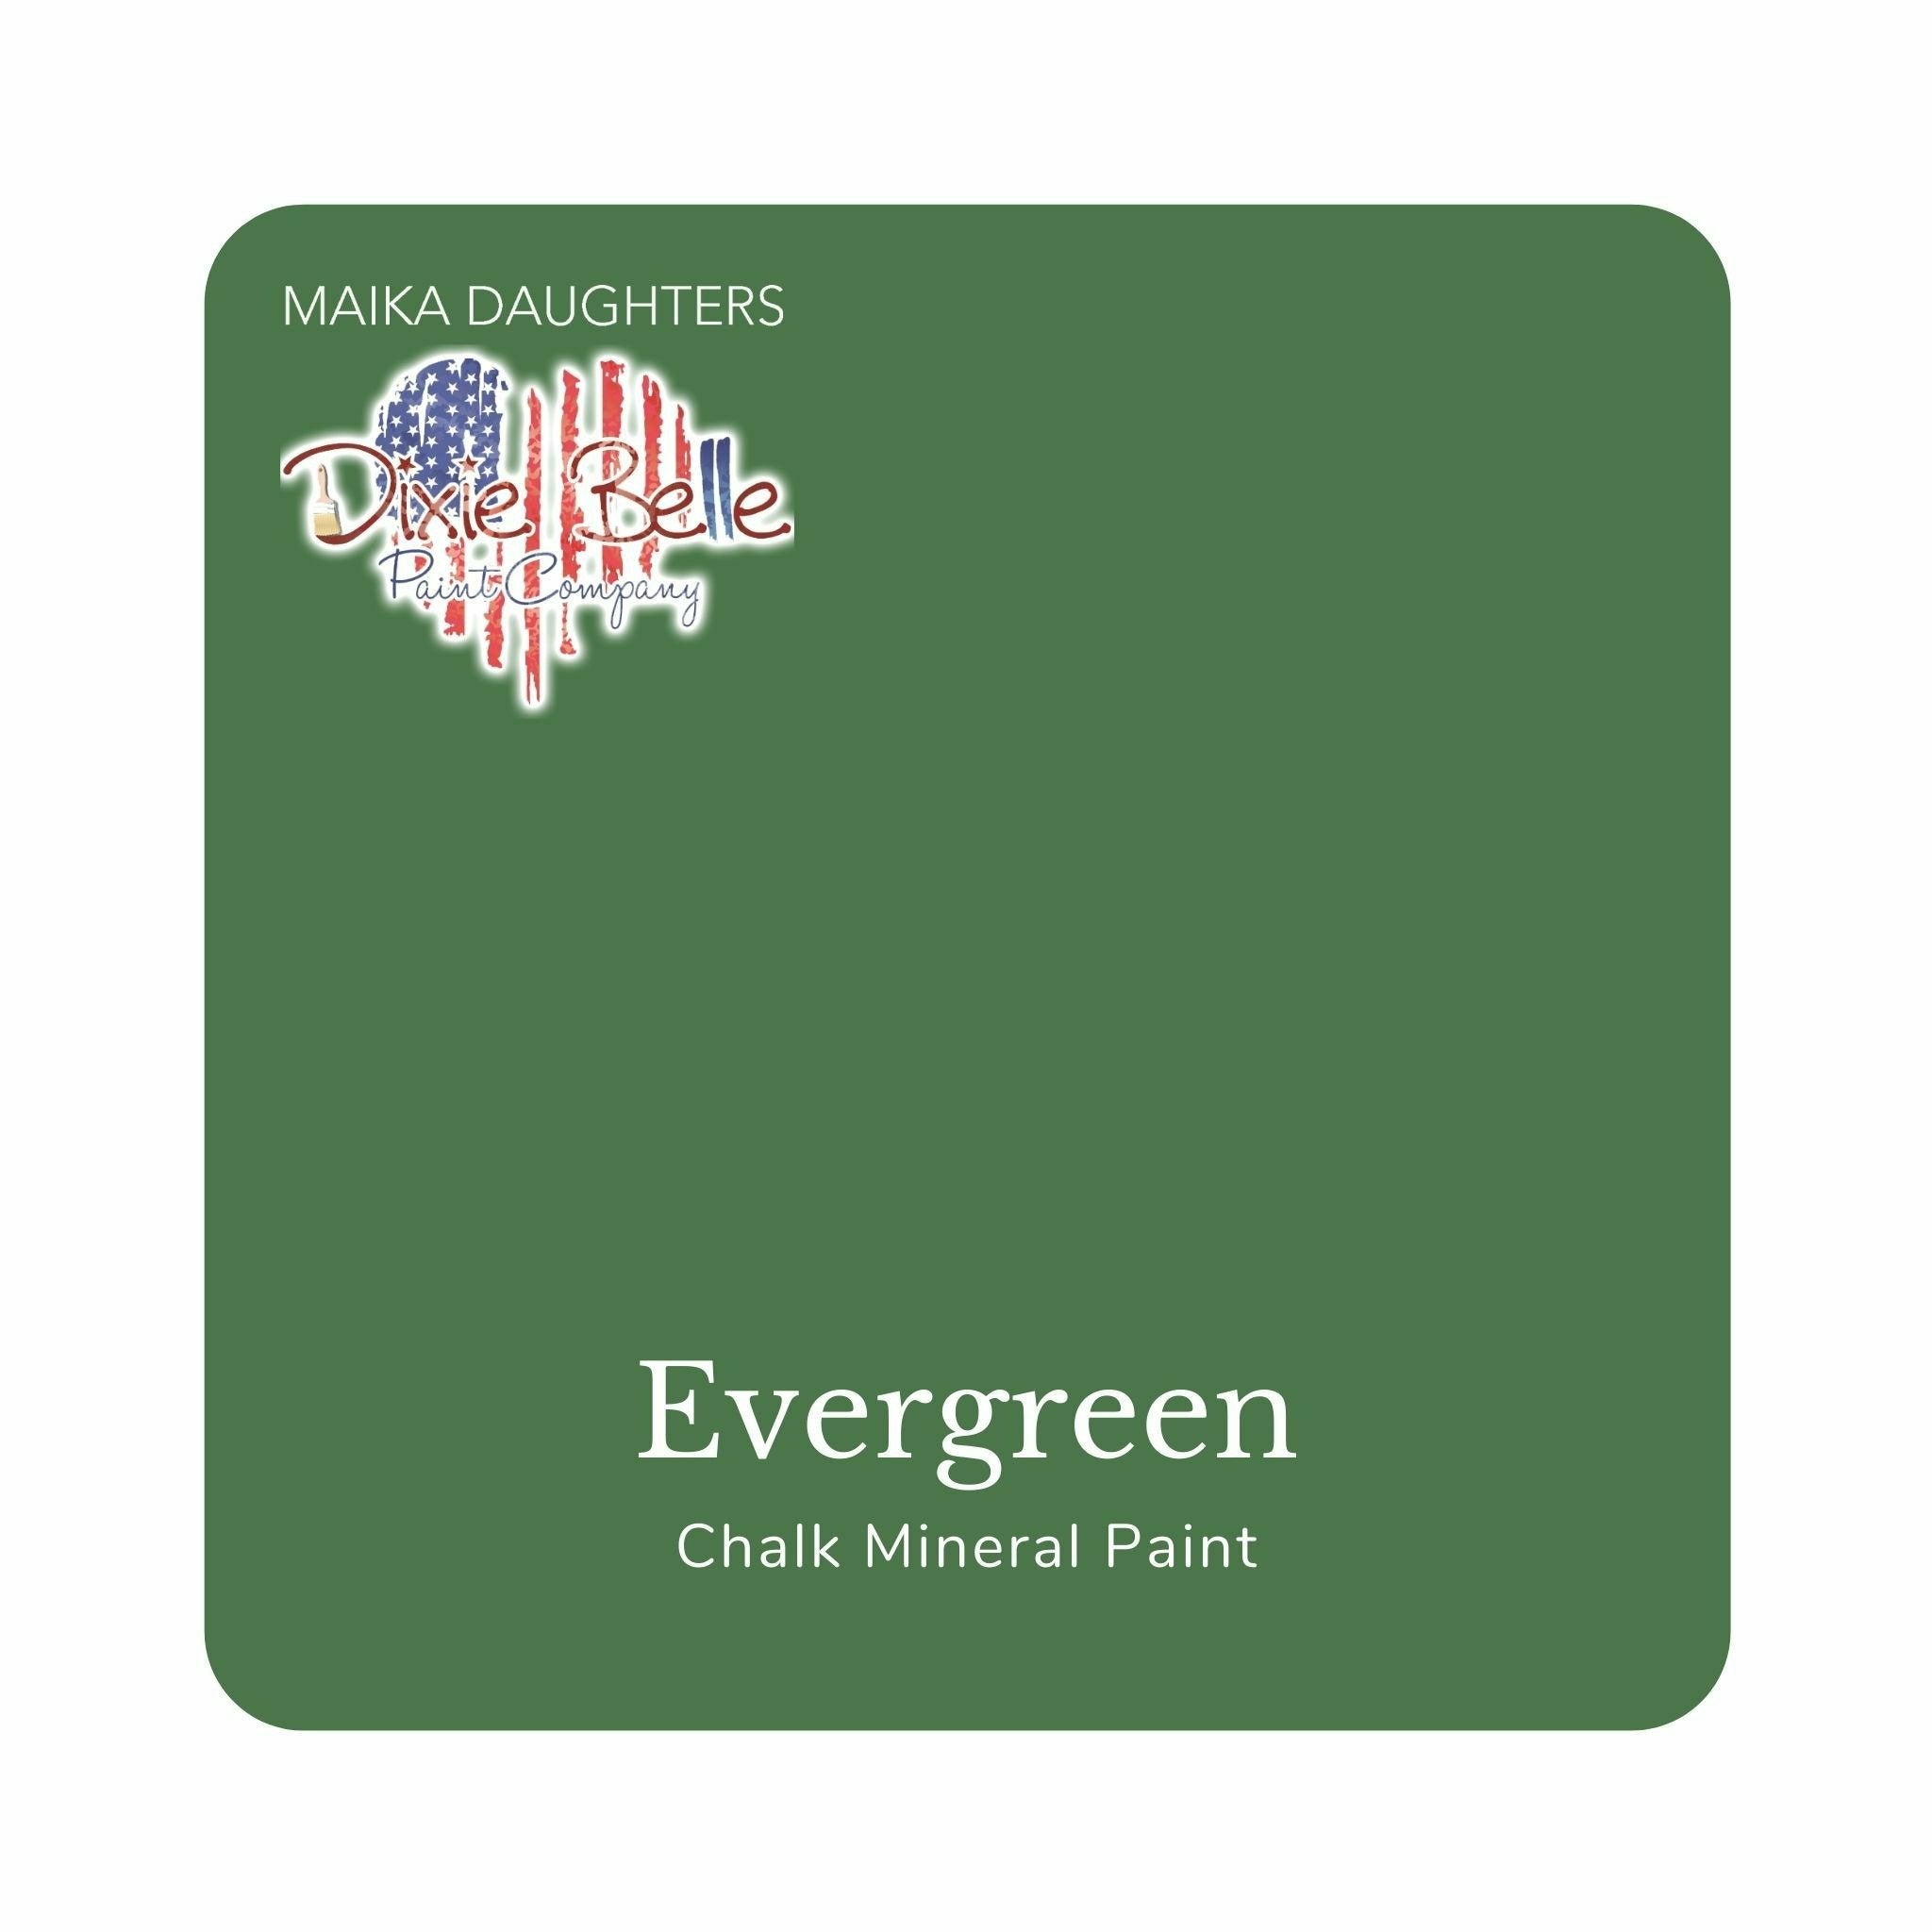 A square swatch card of Dixie Belle Paint Company’s Evergreen Chalk Mineral Paint is against a white background. This color is a soft traditional green.